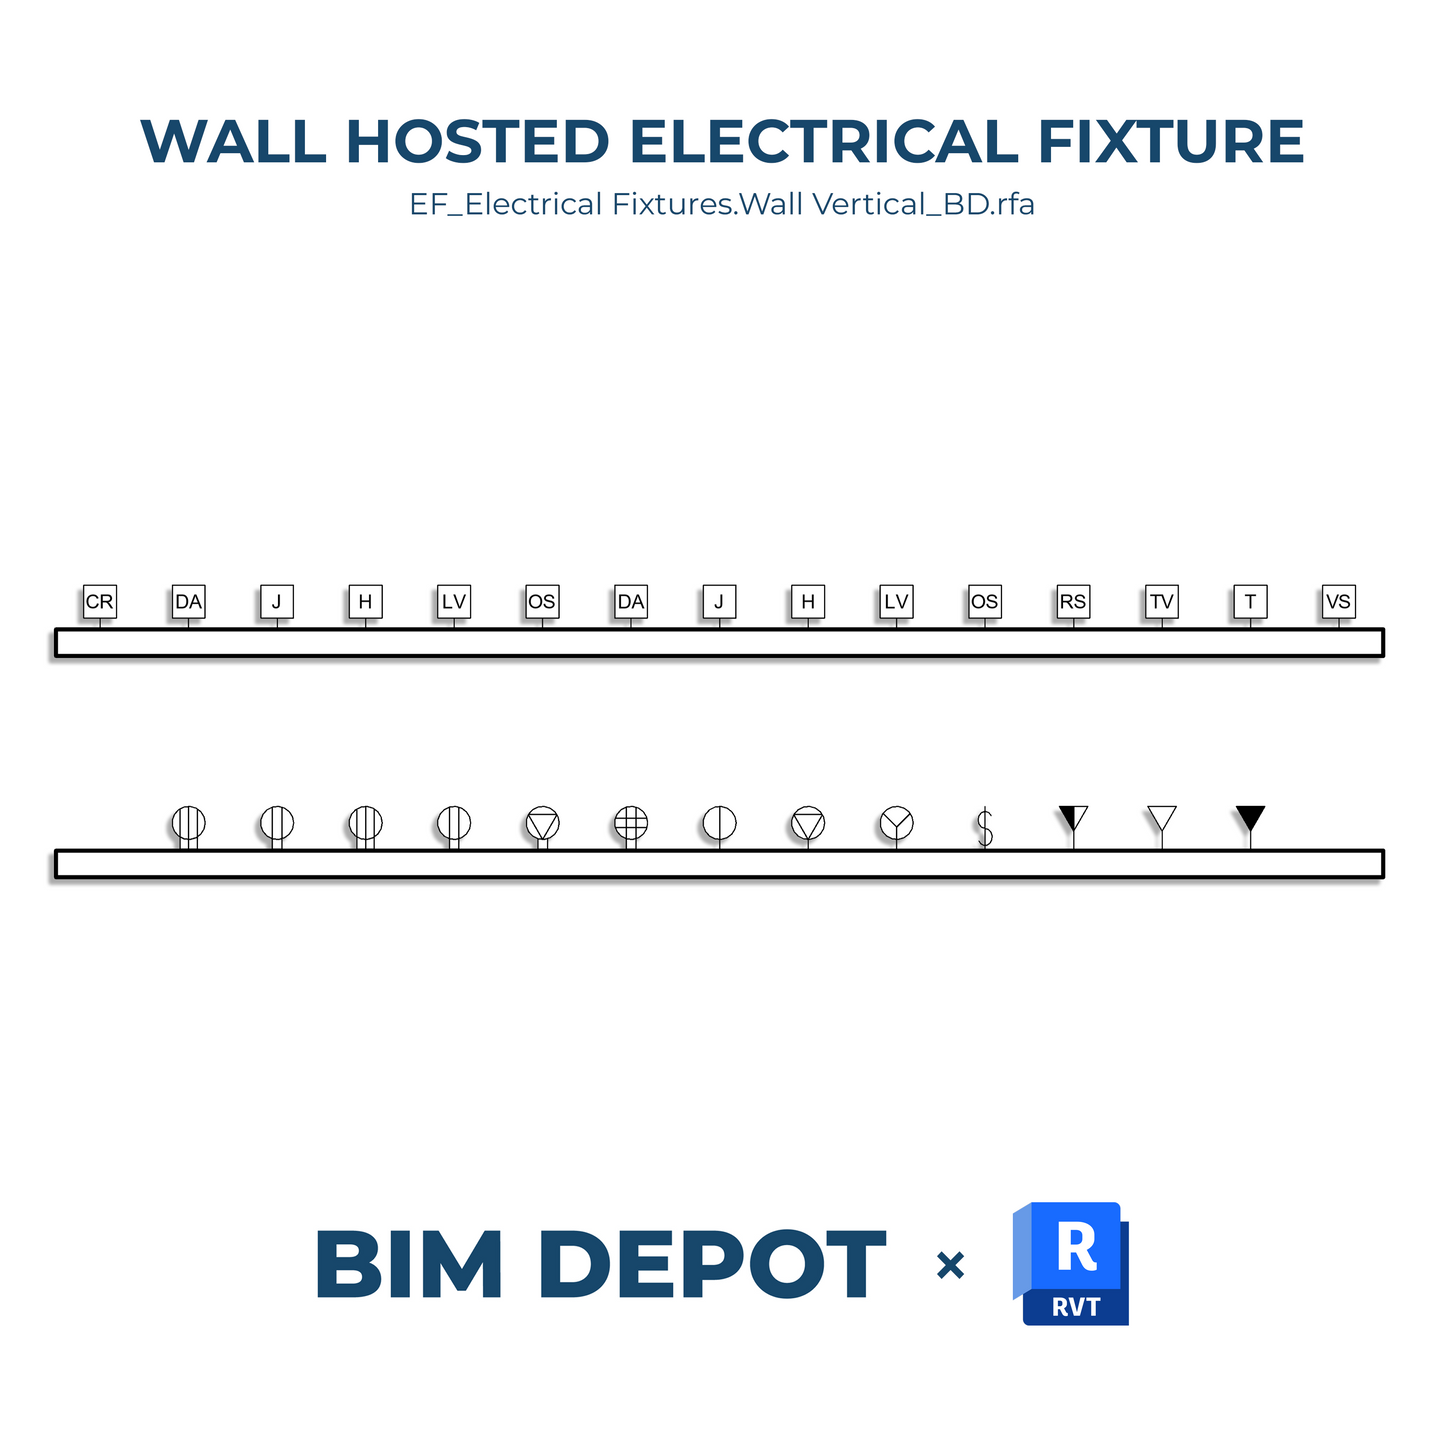 Electrical Fixture - Wall Hosted